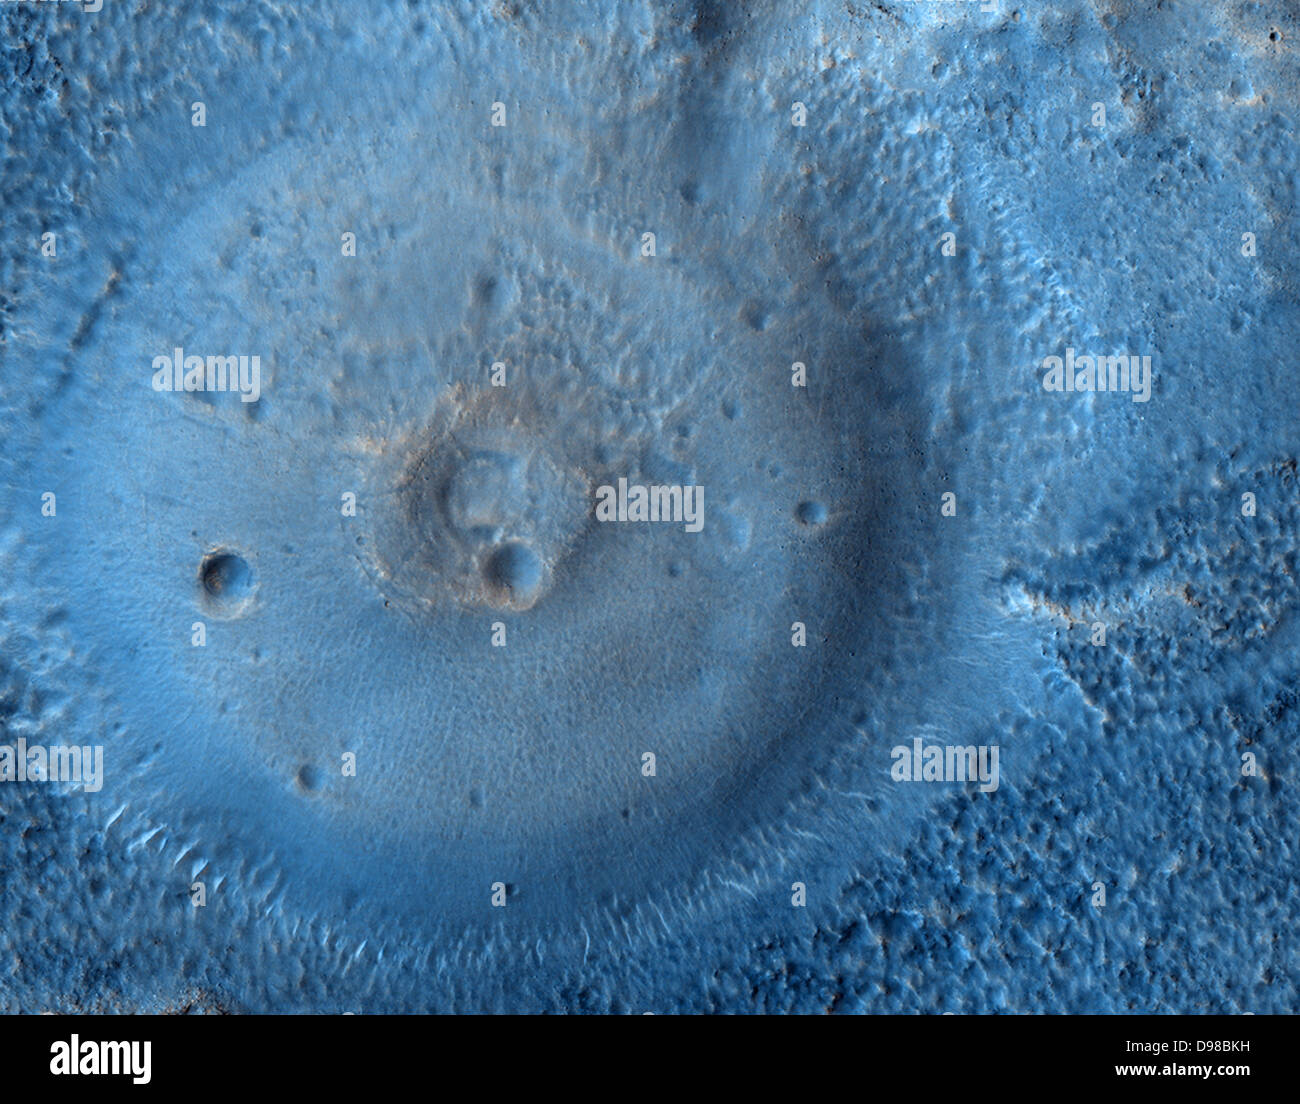 Possible Mud Volcanoes on Mars: Is this a mud volcano on Mars? If so, could it be dredging up Martian microbes? This strange Stock Photo